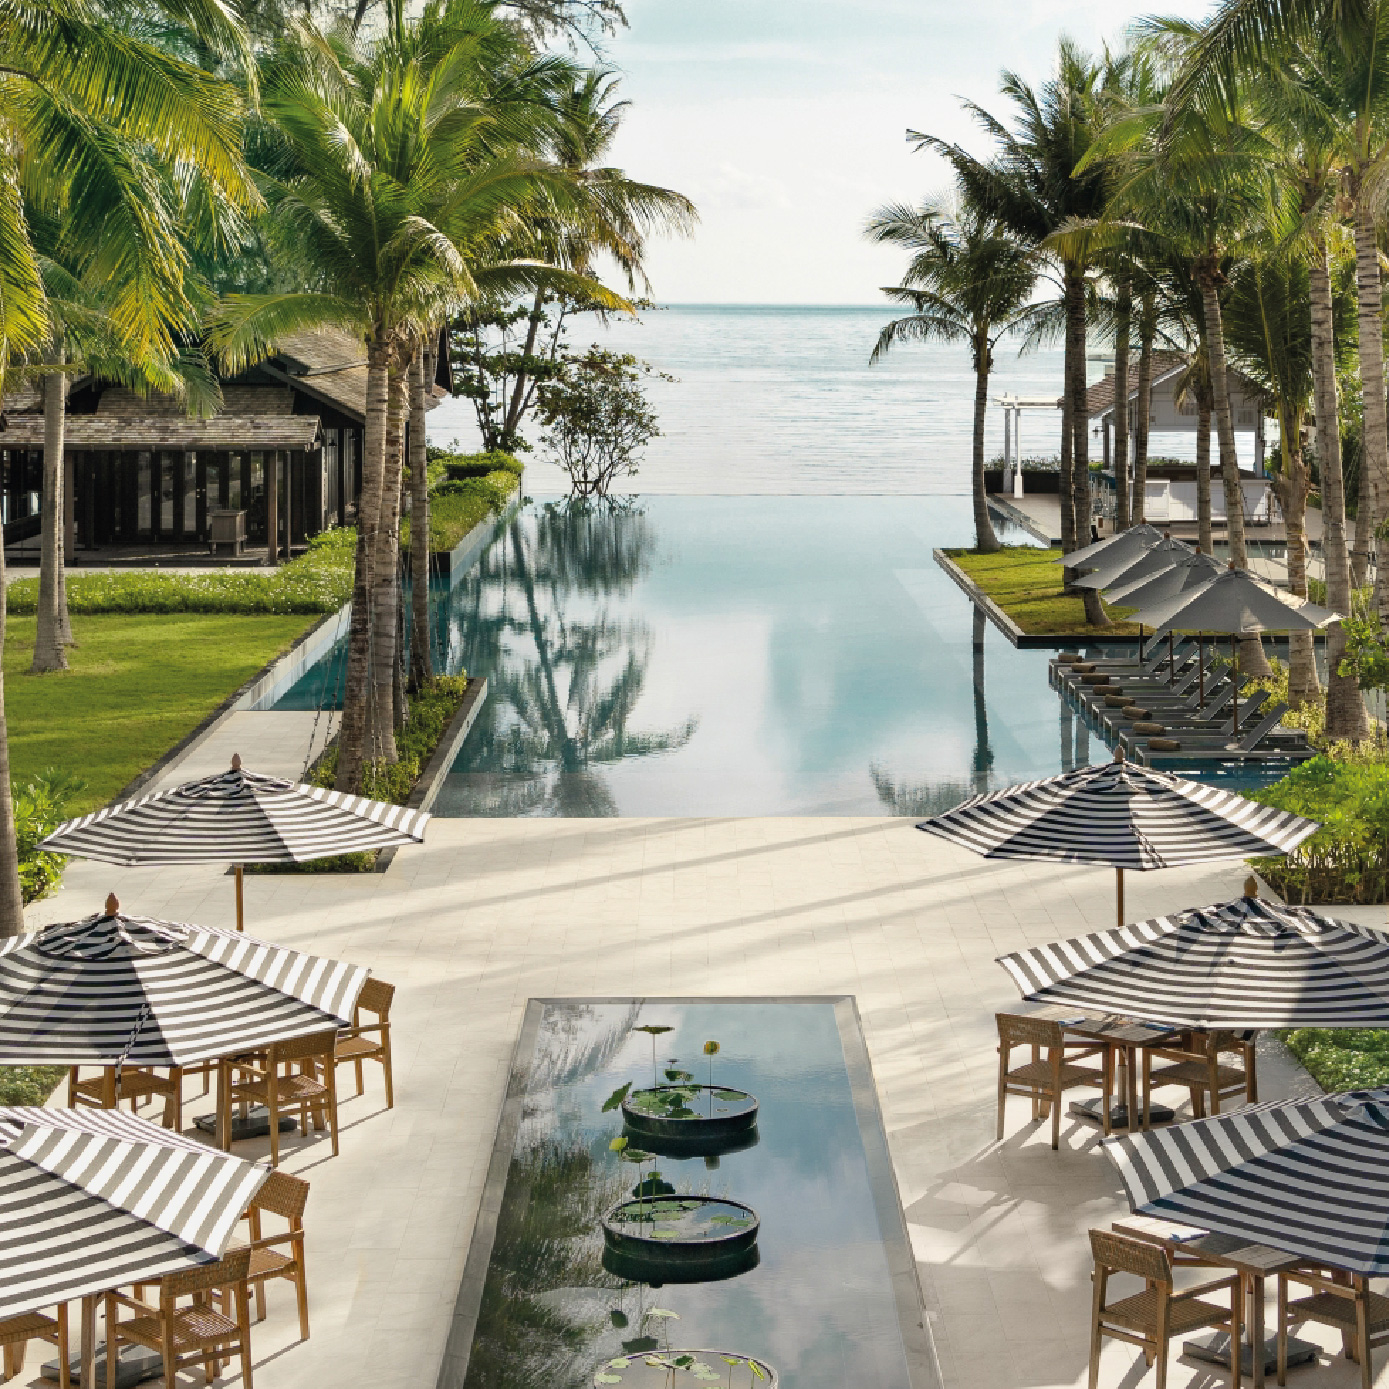 Pack your sunglasses, sunscreen and beach bags and prepare to become a lucky beach castaway at Kimpton Kitalay Samui.